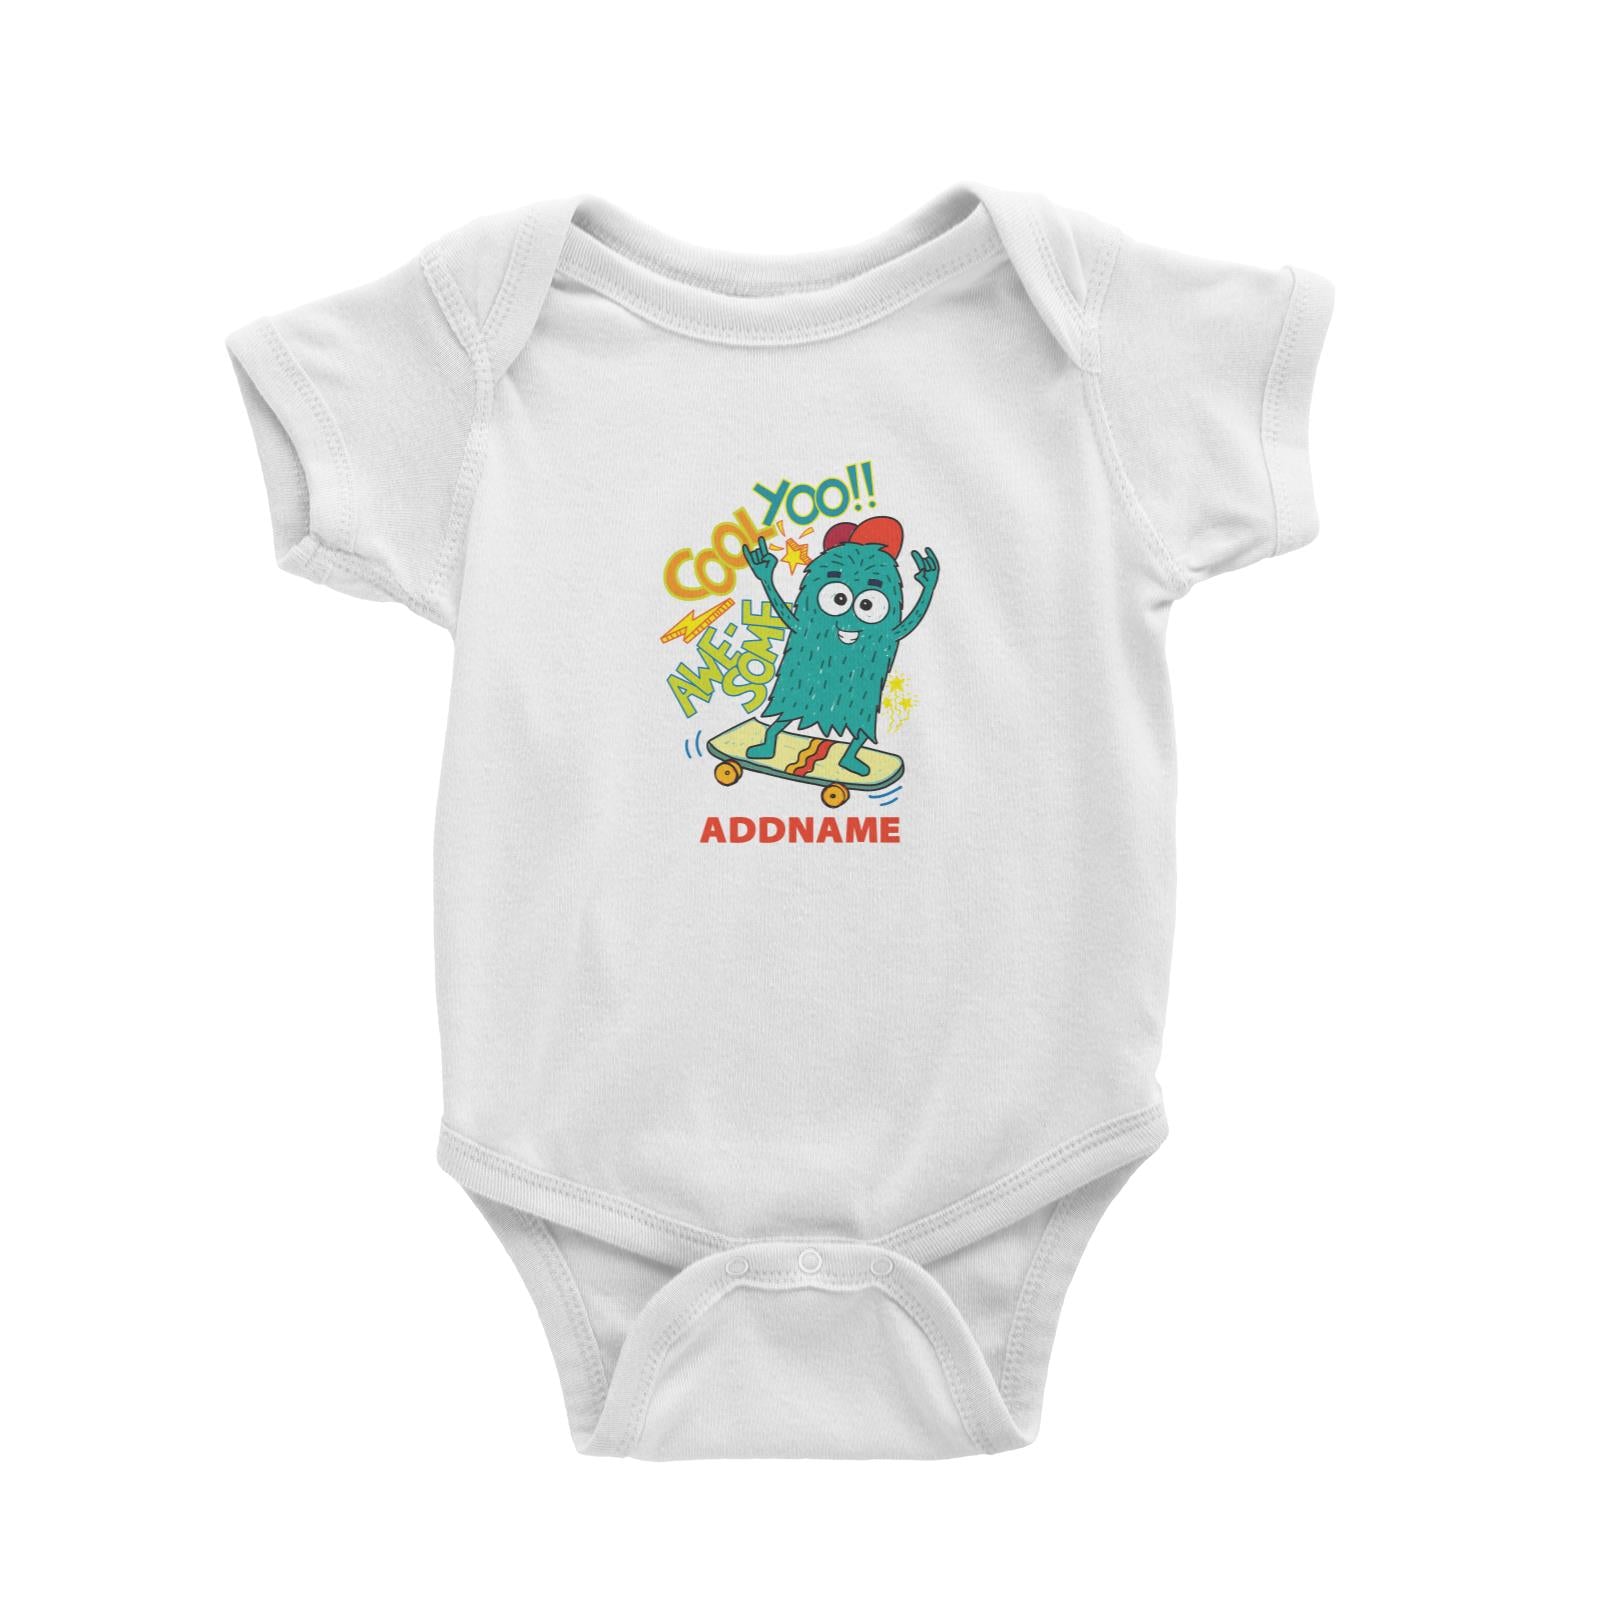 Cool Cute Monster Cool Yoo Awesome Skateboard Monster Addname Baby Romper